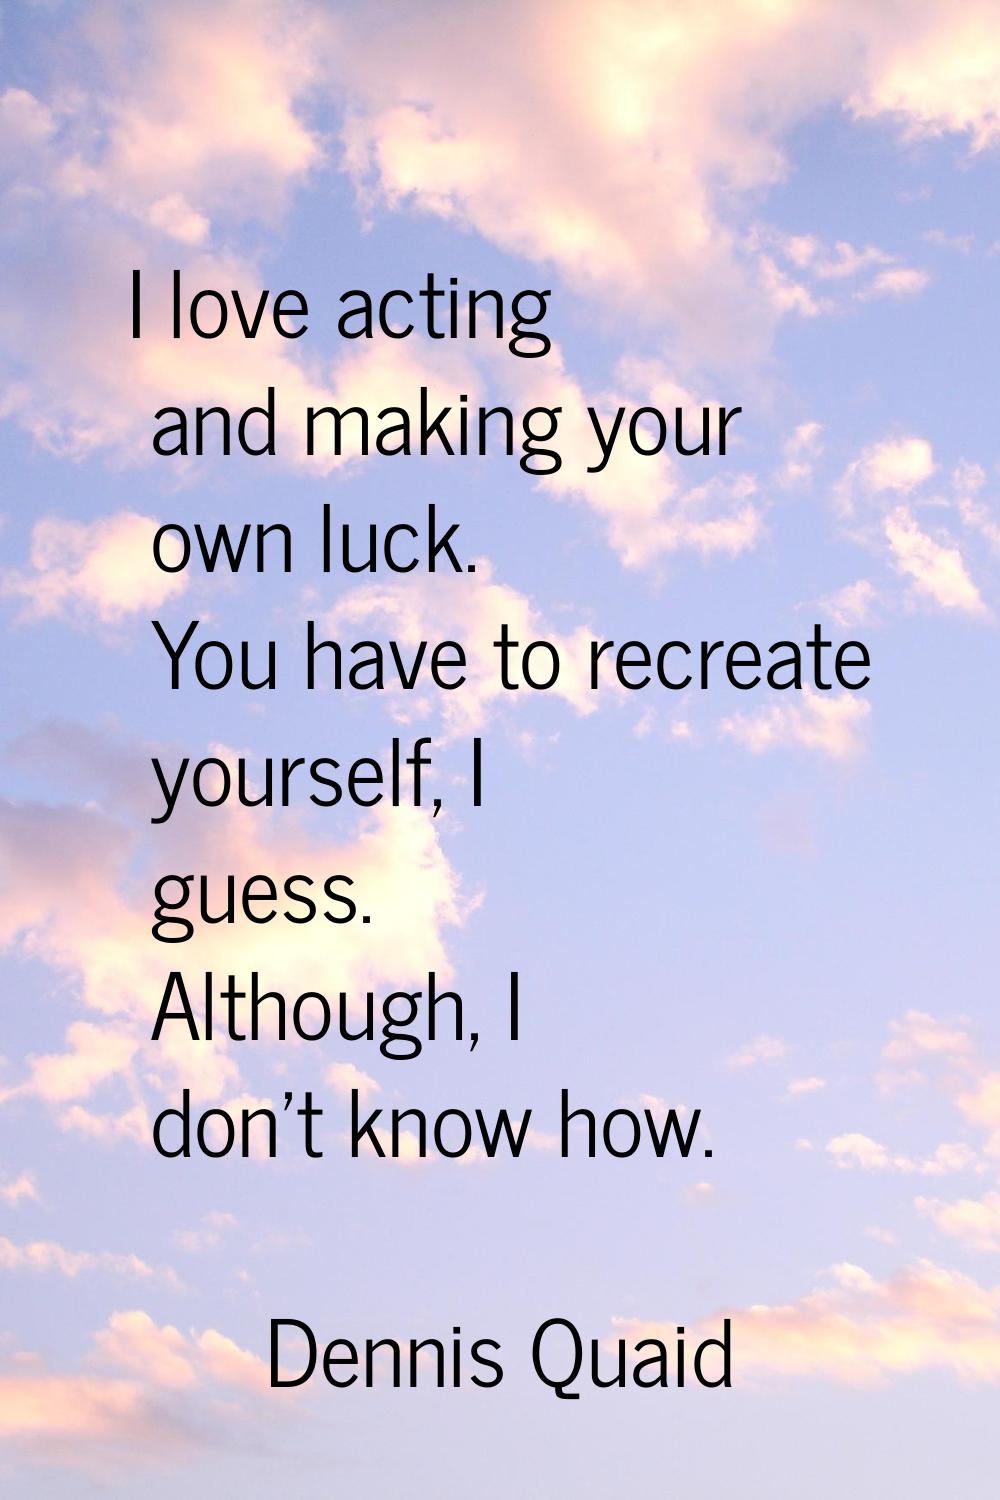 I love acting and making your own luck. You have to recreate yourself, I guess. Although, I don't k